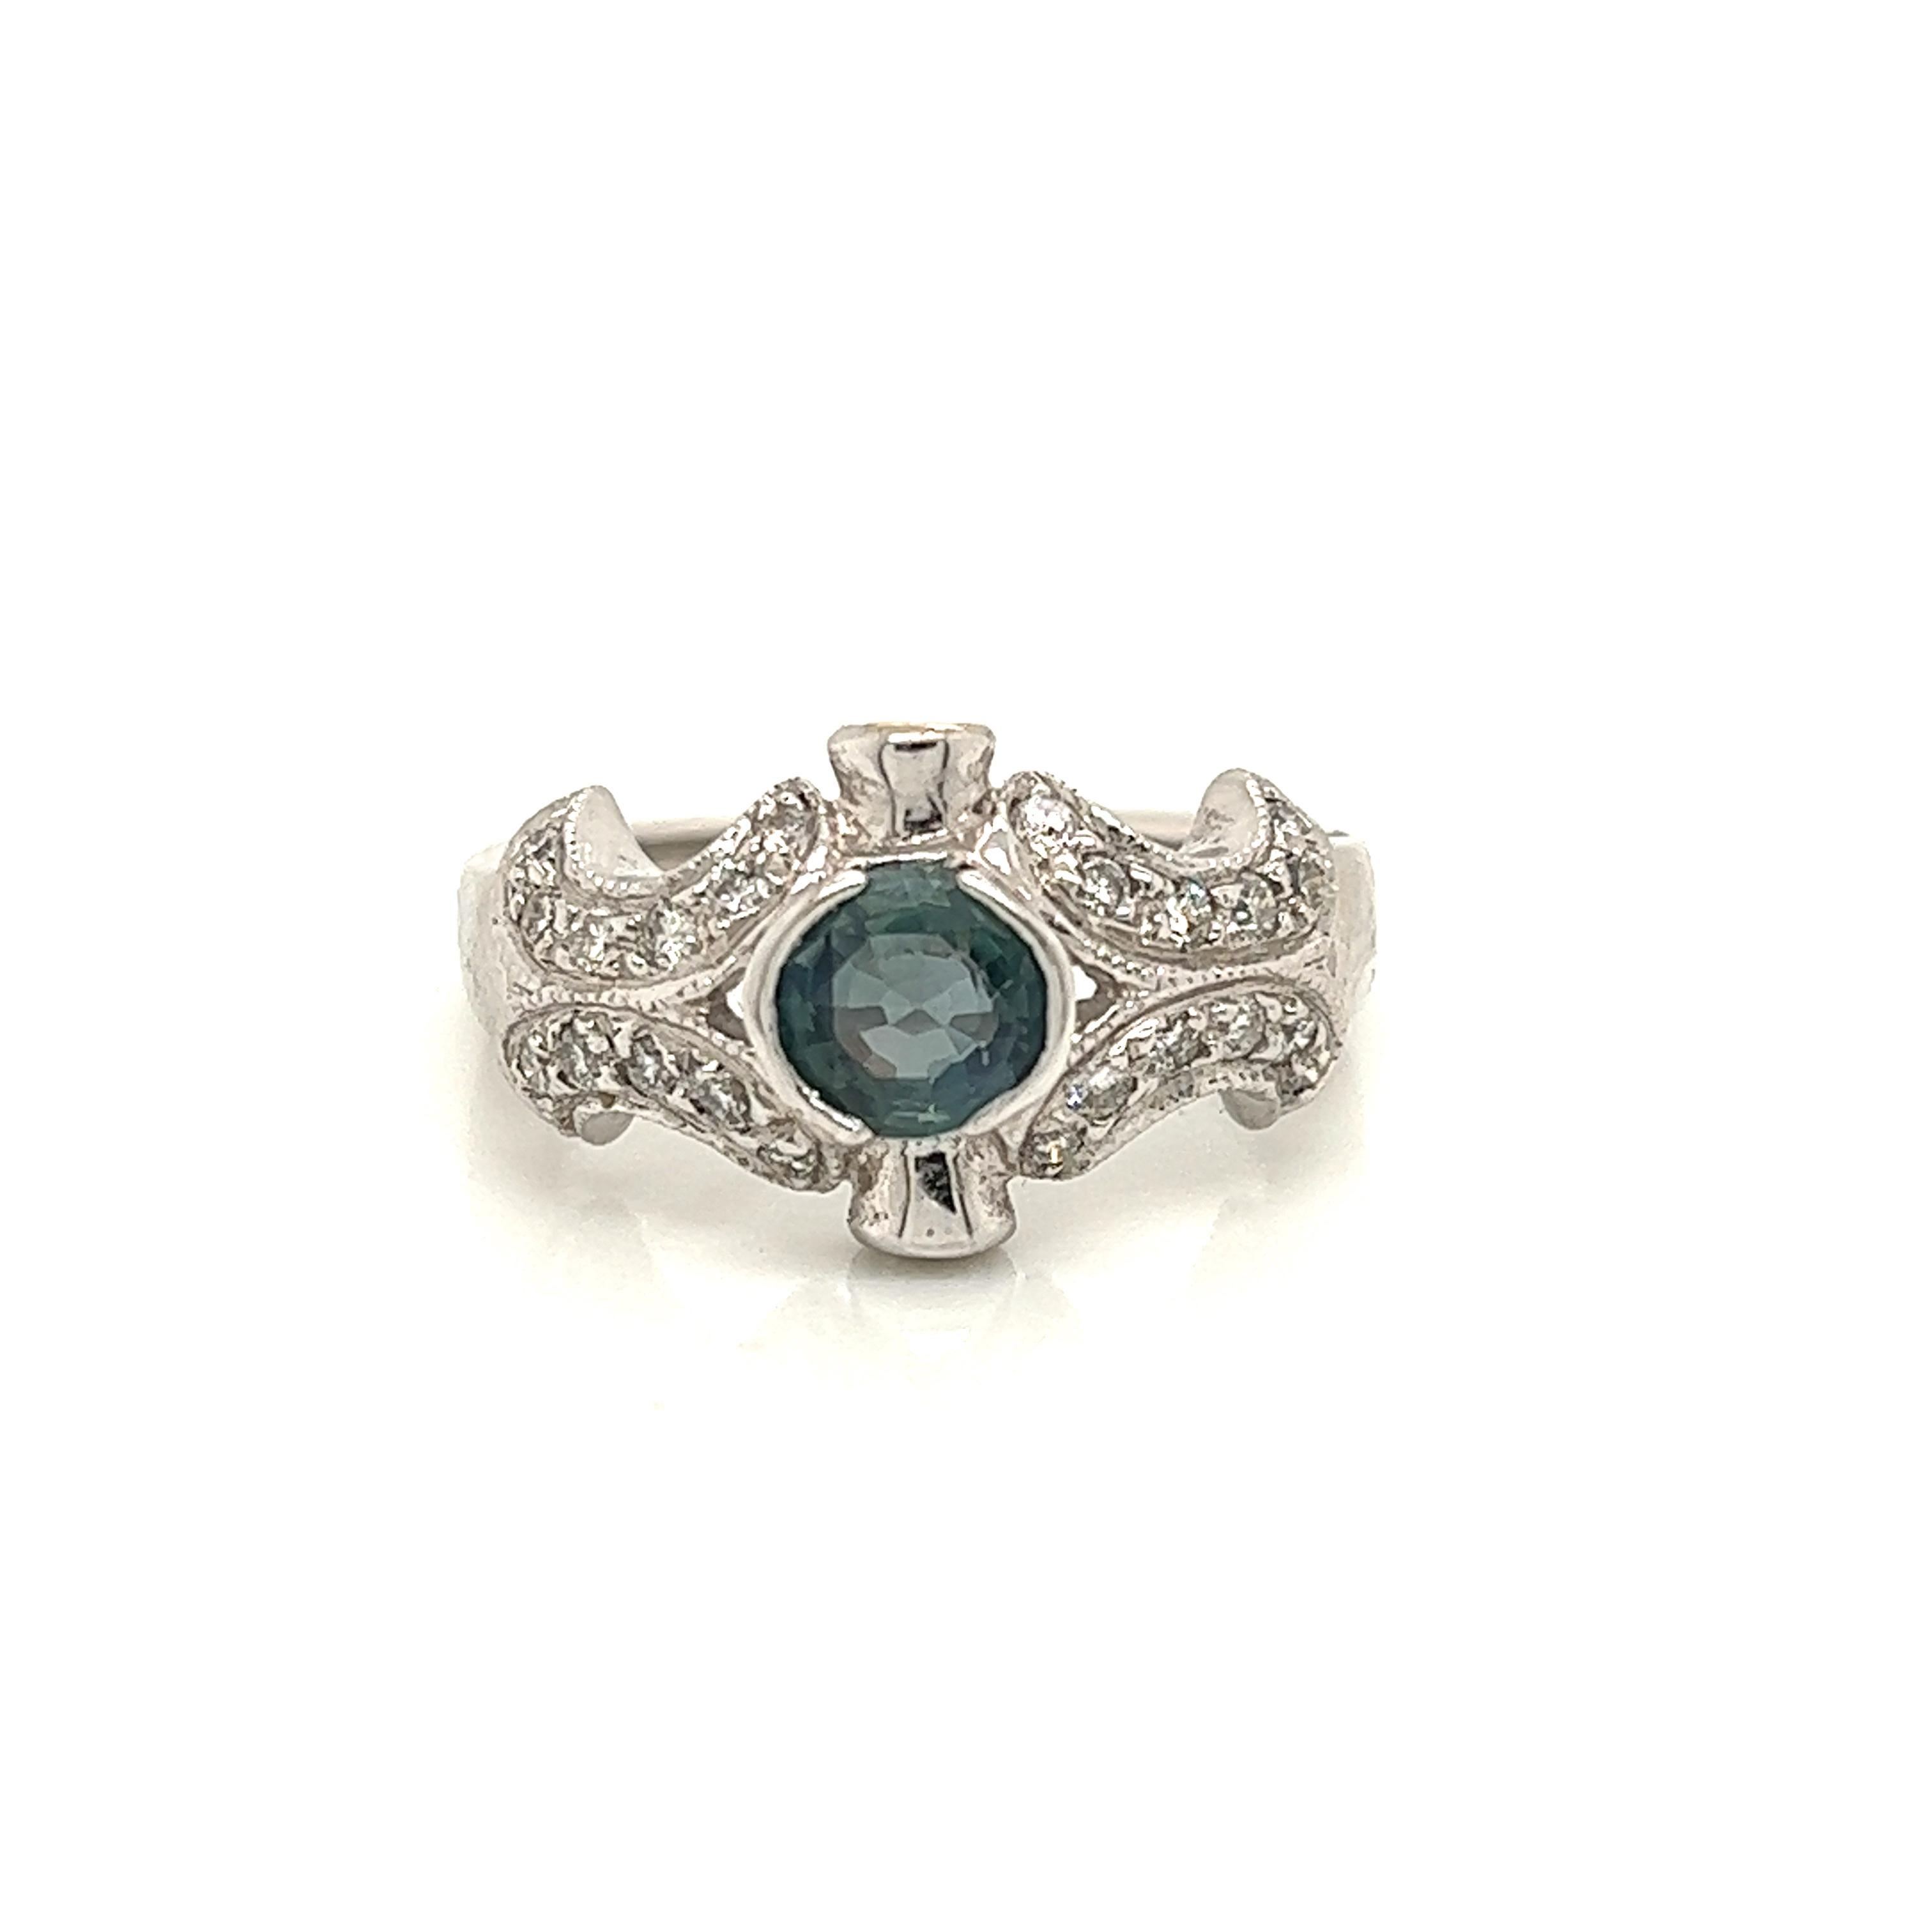 This is a gorgeous natural AAA quality oval Alexandrite surrounded by dainty diamonds that is set in a vintage white gold setting. This ring features a natural 1.11 carat oval alexandrite that is certified by the Gemological Institute of America